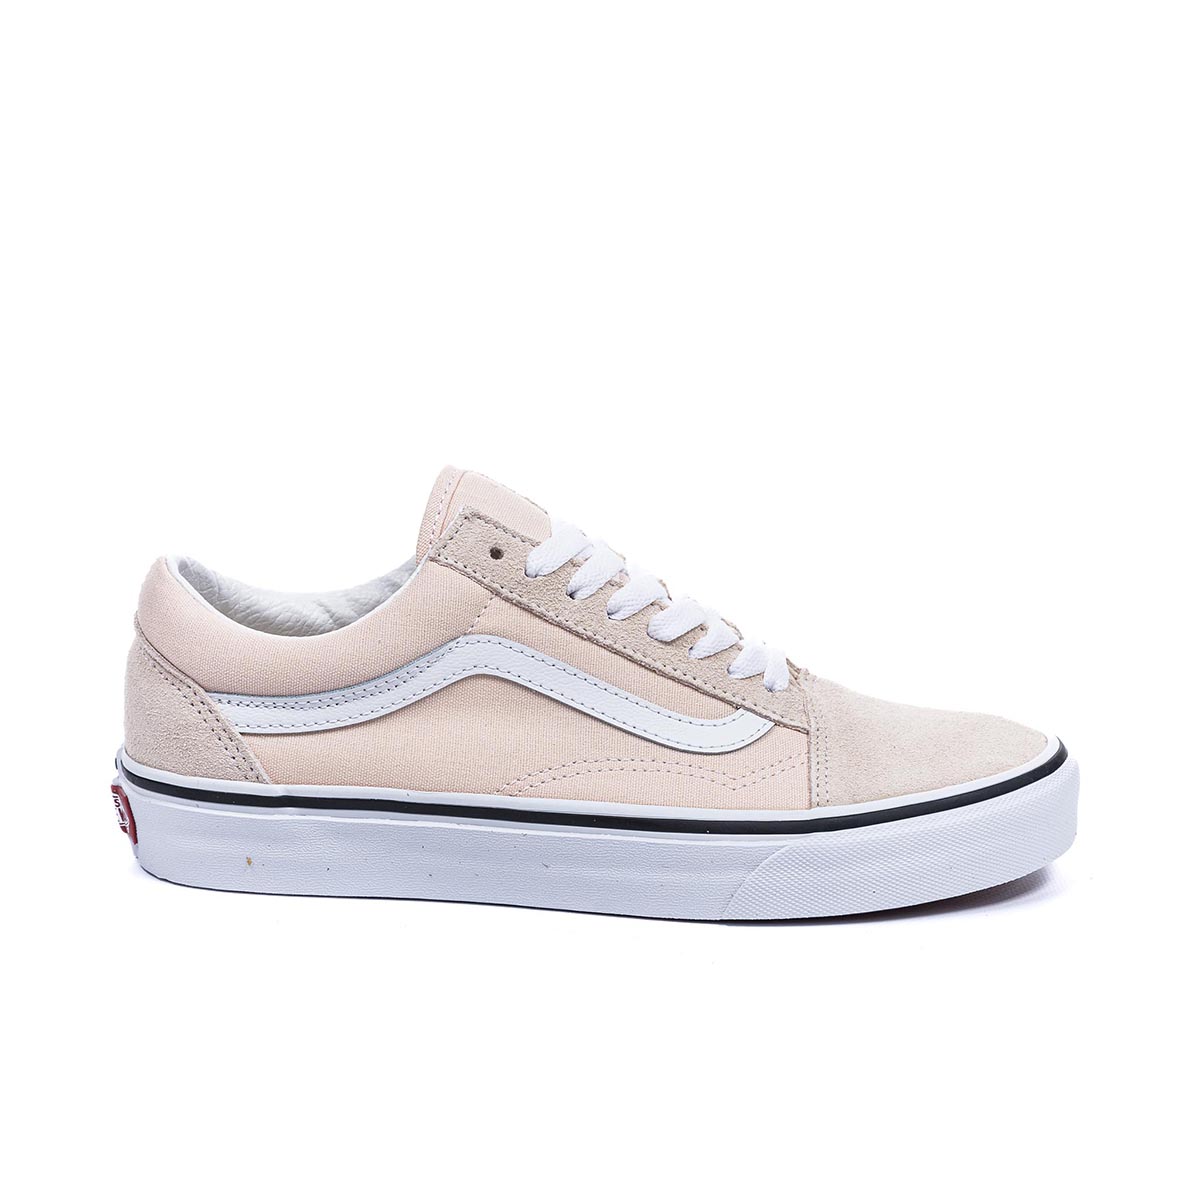 VANS - COLOR THEORY OLD SKOOL SHOES